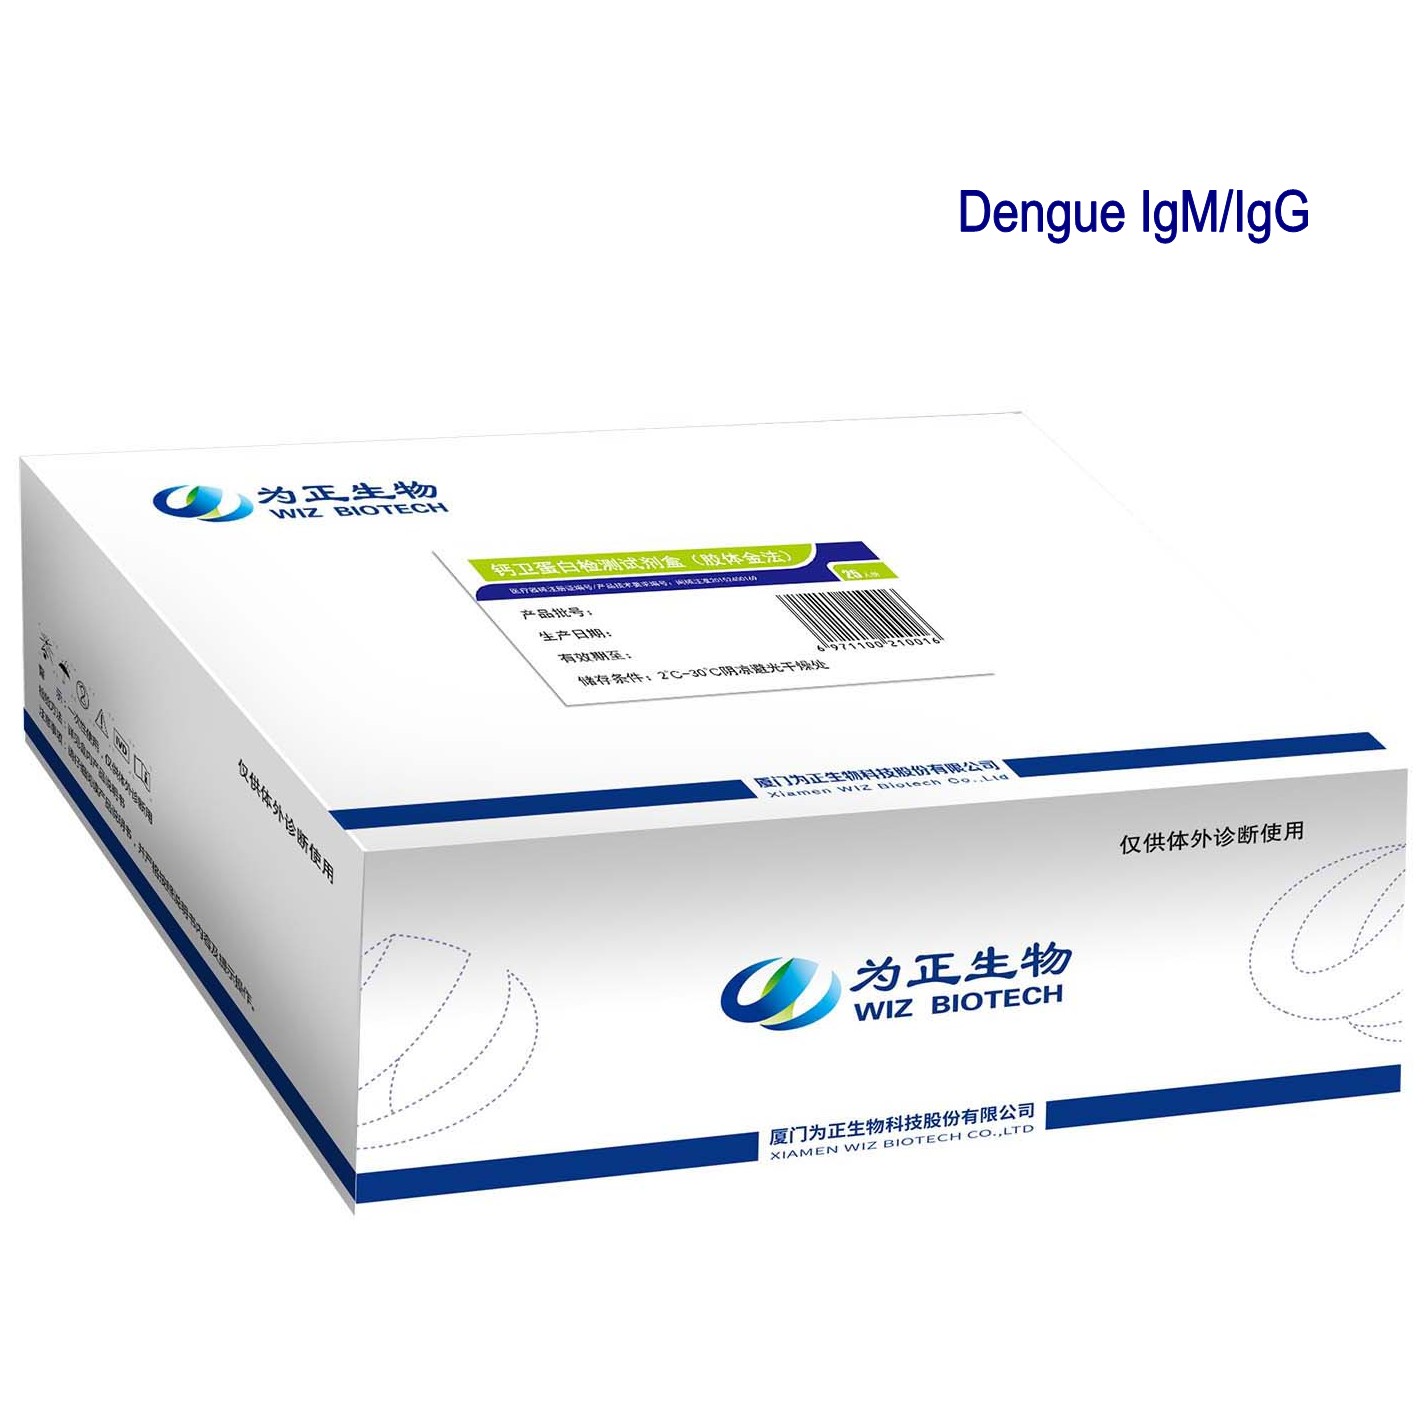 New Fashion Design for Fractional Acne Scar Removal - Diagnostic Kit (Colloidal Gold) for IgM/IgG Antibody to Dengue Virus – Baysen